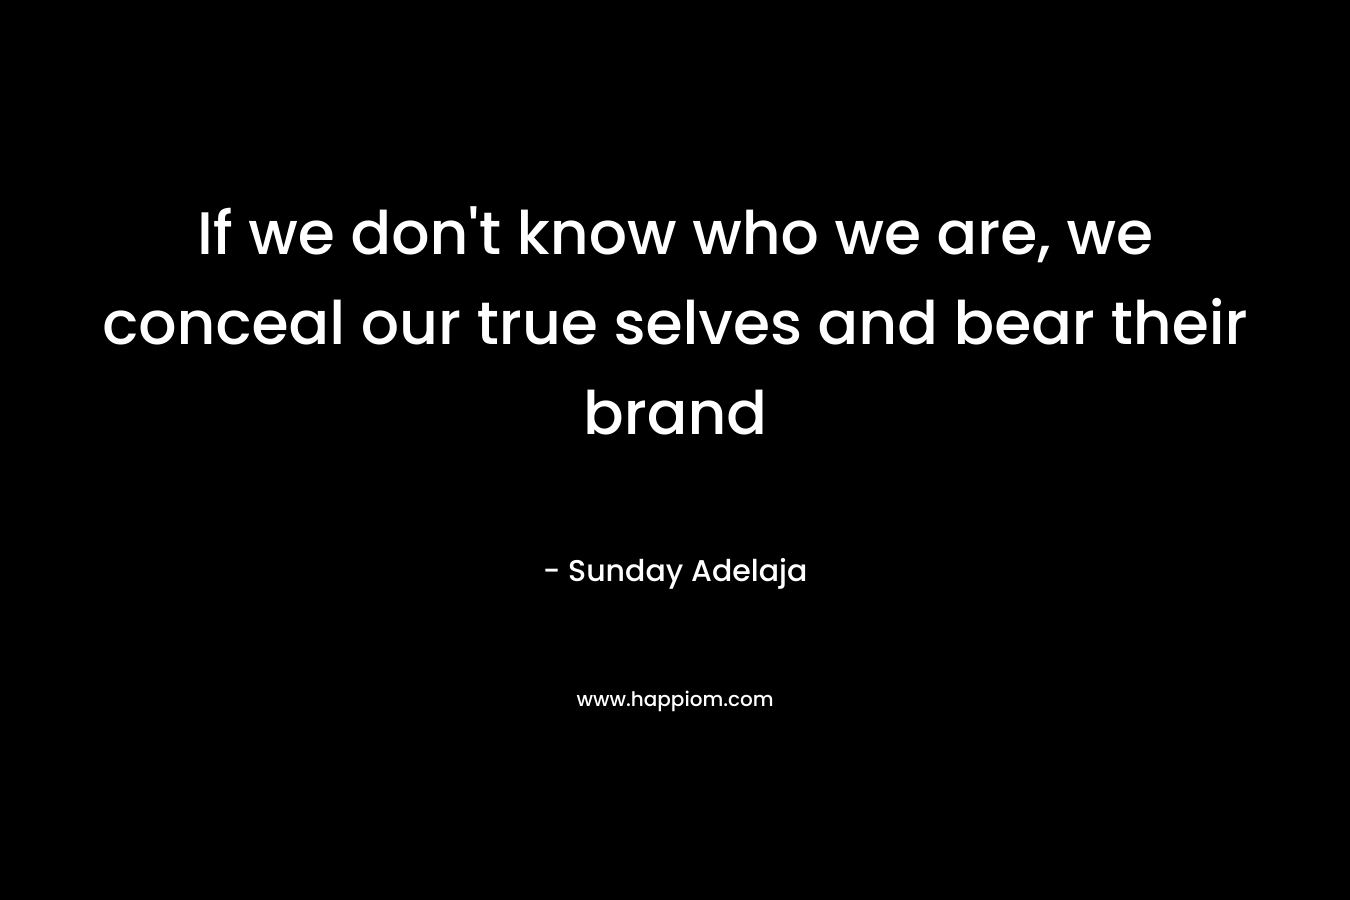 If we don’t know who we are, we conceal our true selves and bear their brand – Sunday Adelaja